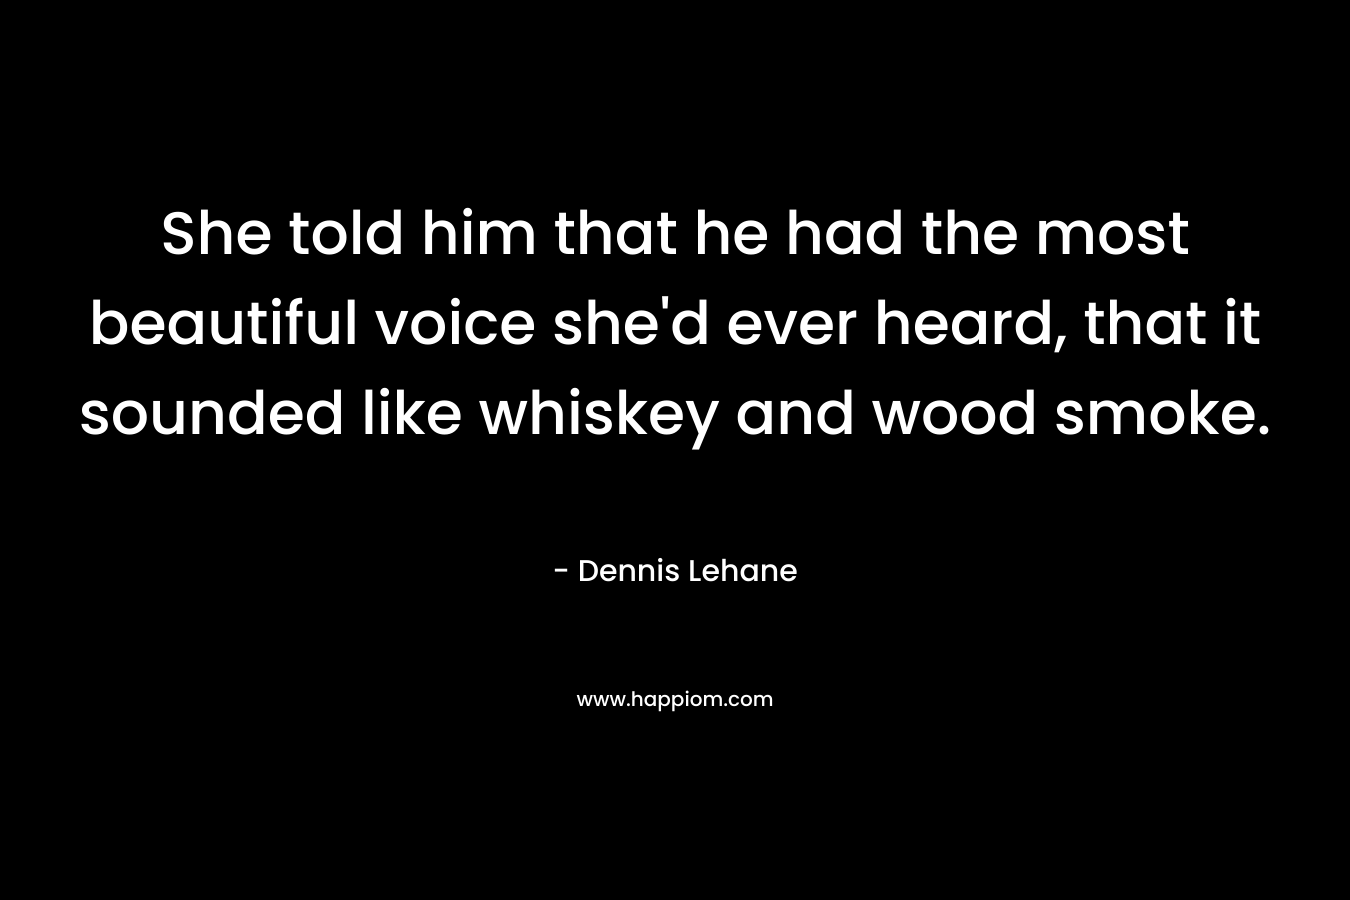 She told him that he had the most beautiful voice she’d ever heard, that it sounded like whiskey and wood smoke. – Dennis Lehane